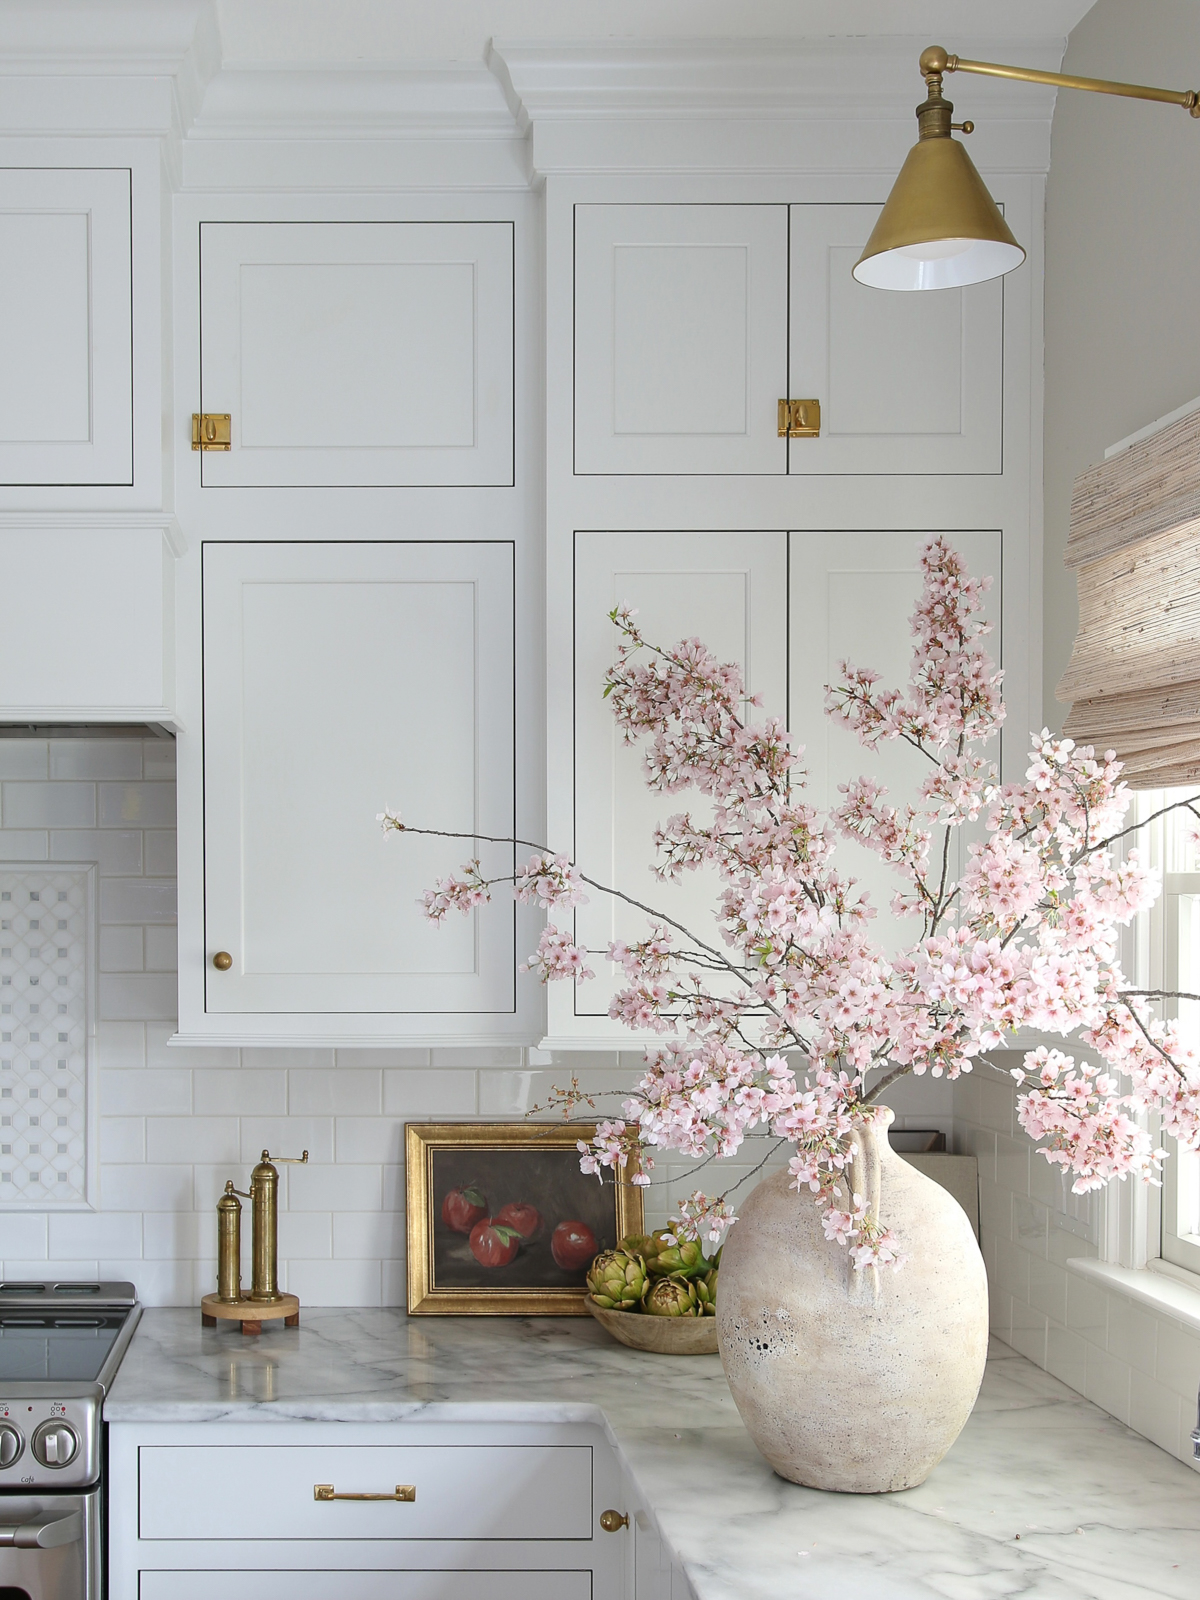 Large ceramic vase with cherry blossom branches on a marble countertop. White kitchen cabinets and white subway tile backsplash